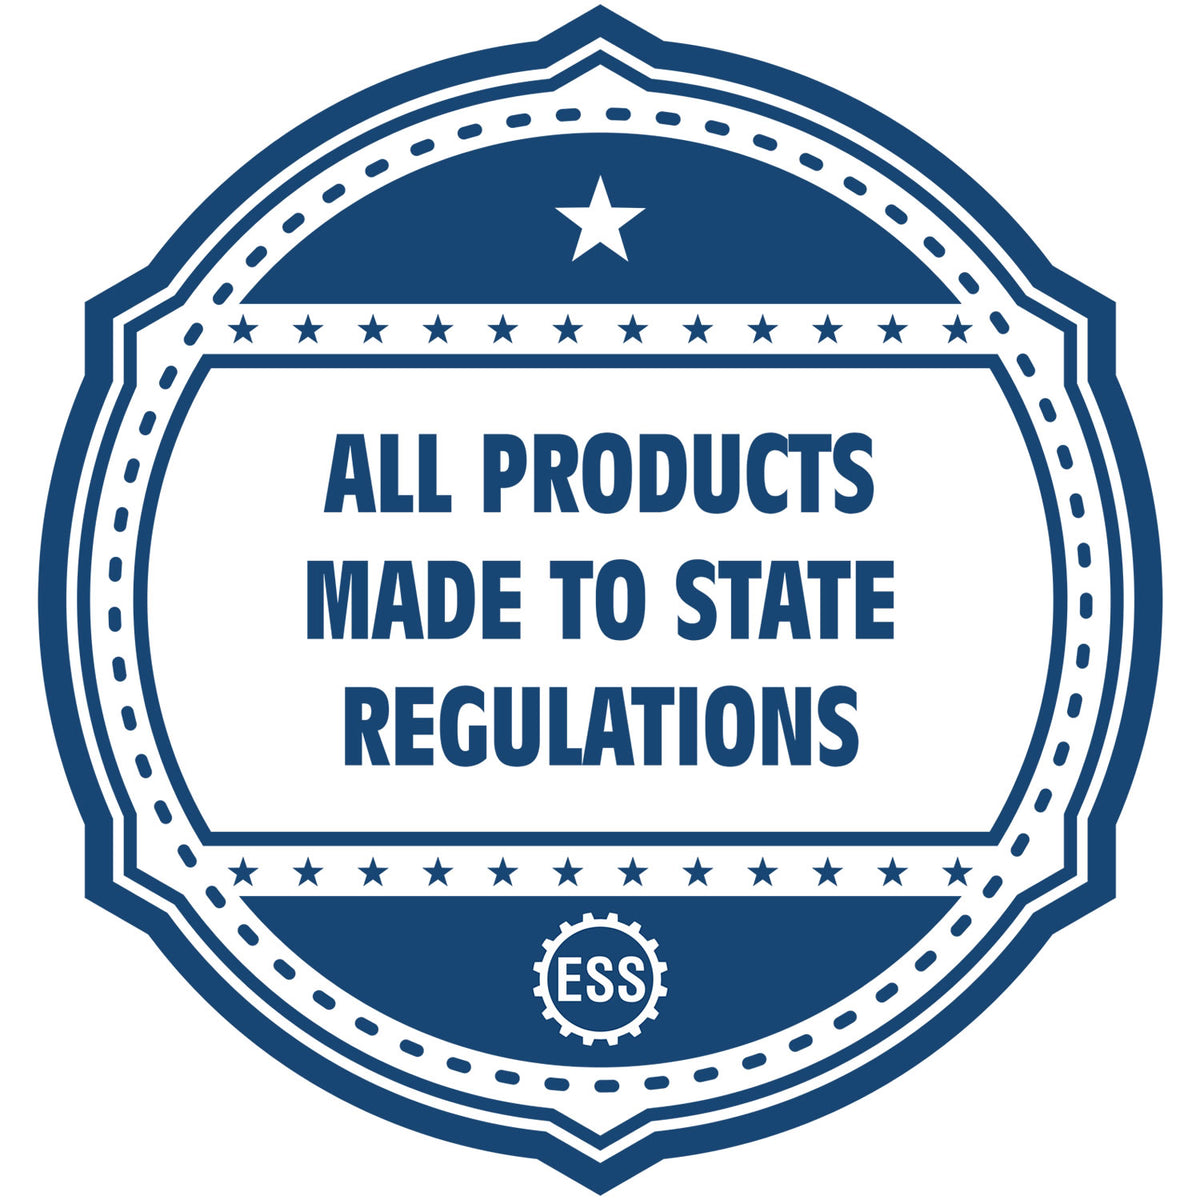 An icon or badge element for the Premium MaxLight Pre-Inked Idaho Engineering Stamp showing that this product is made in compliance with state regulations.